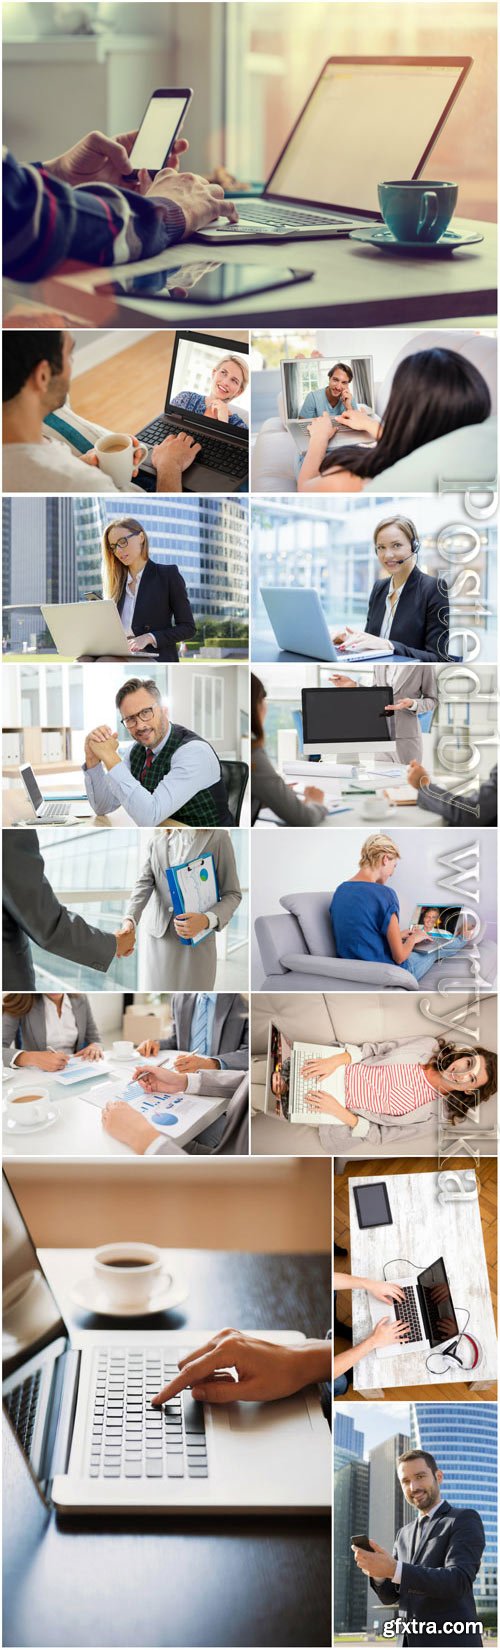 Business people working in the office stock photo